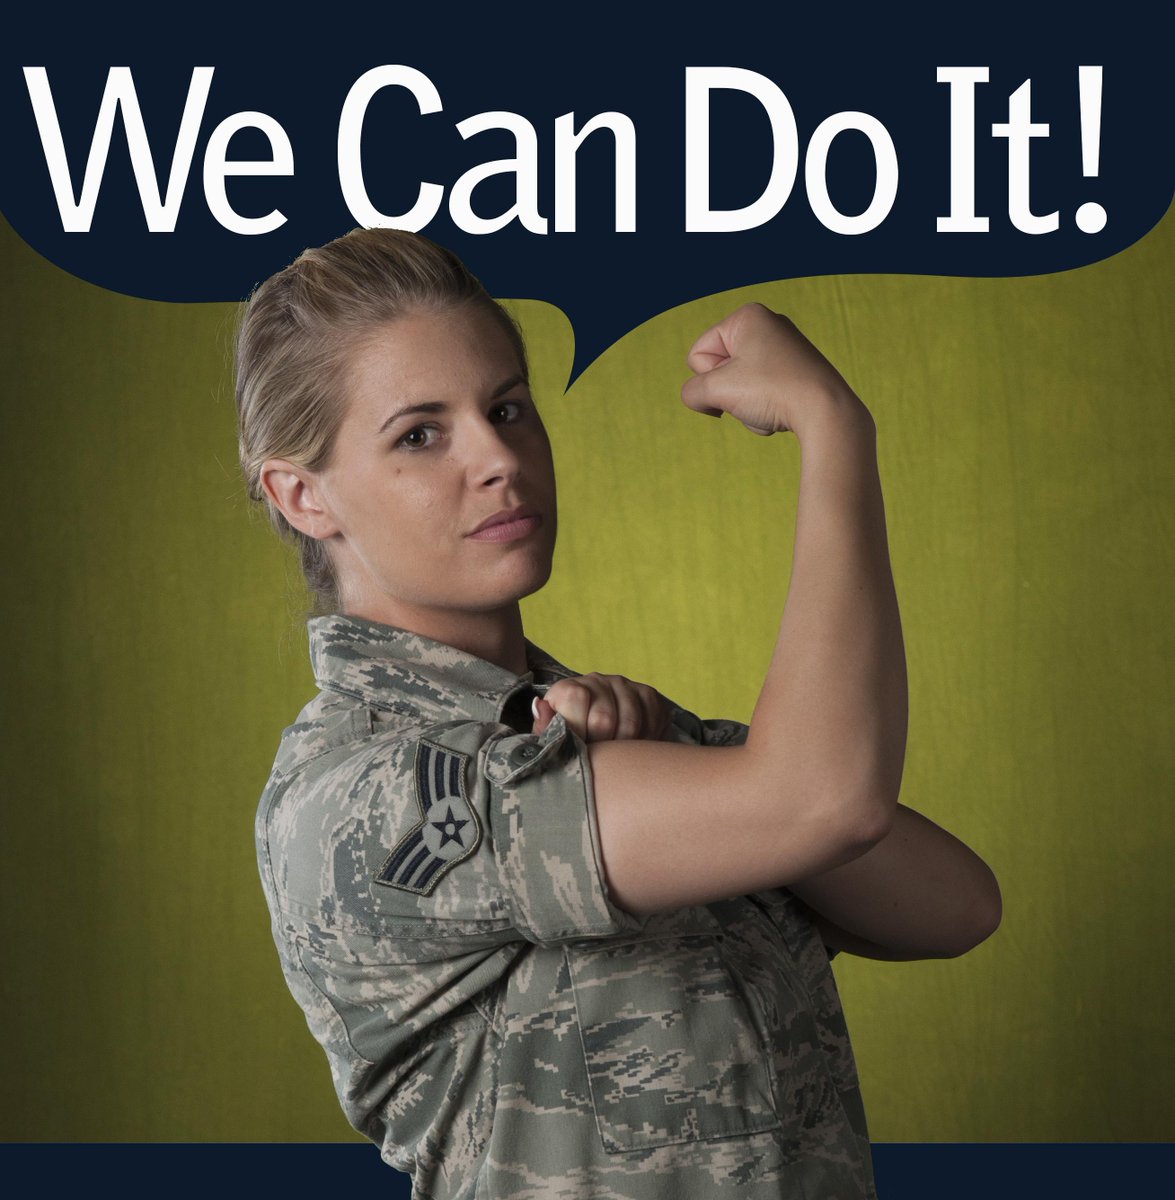 RT @usairforce: Women in the #AirForce, & around the world, break down barriers every day. Celebrate #WomensEqualityDay w/ us! http://t.co/…